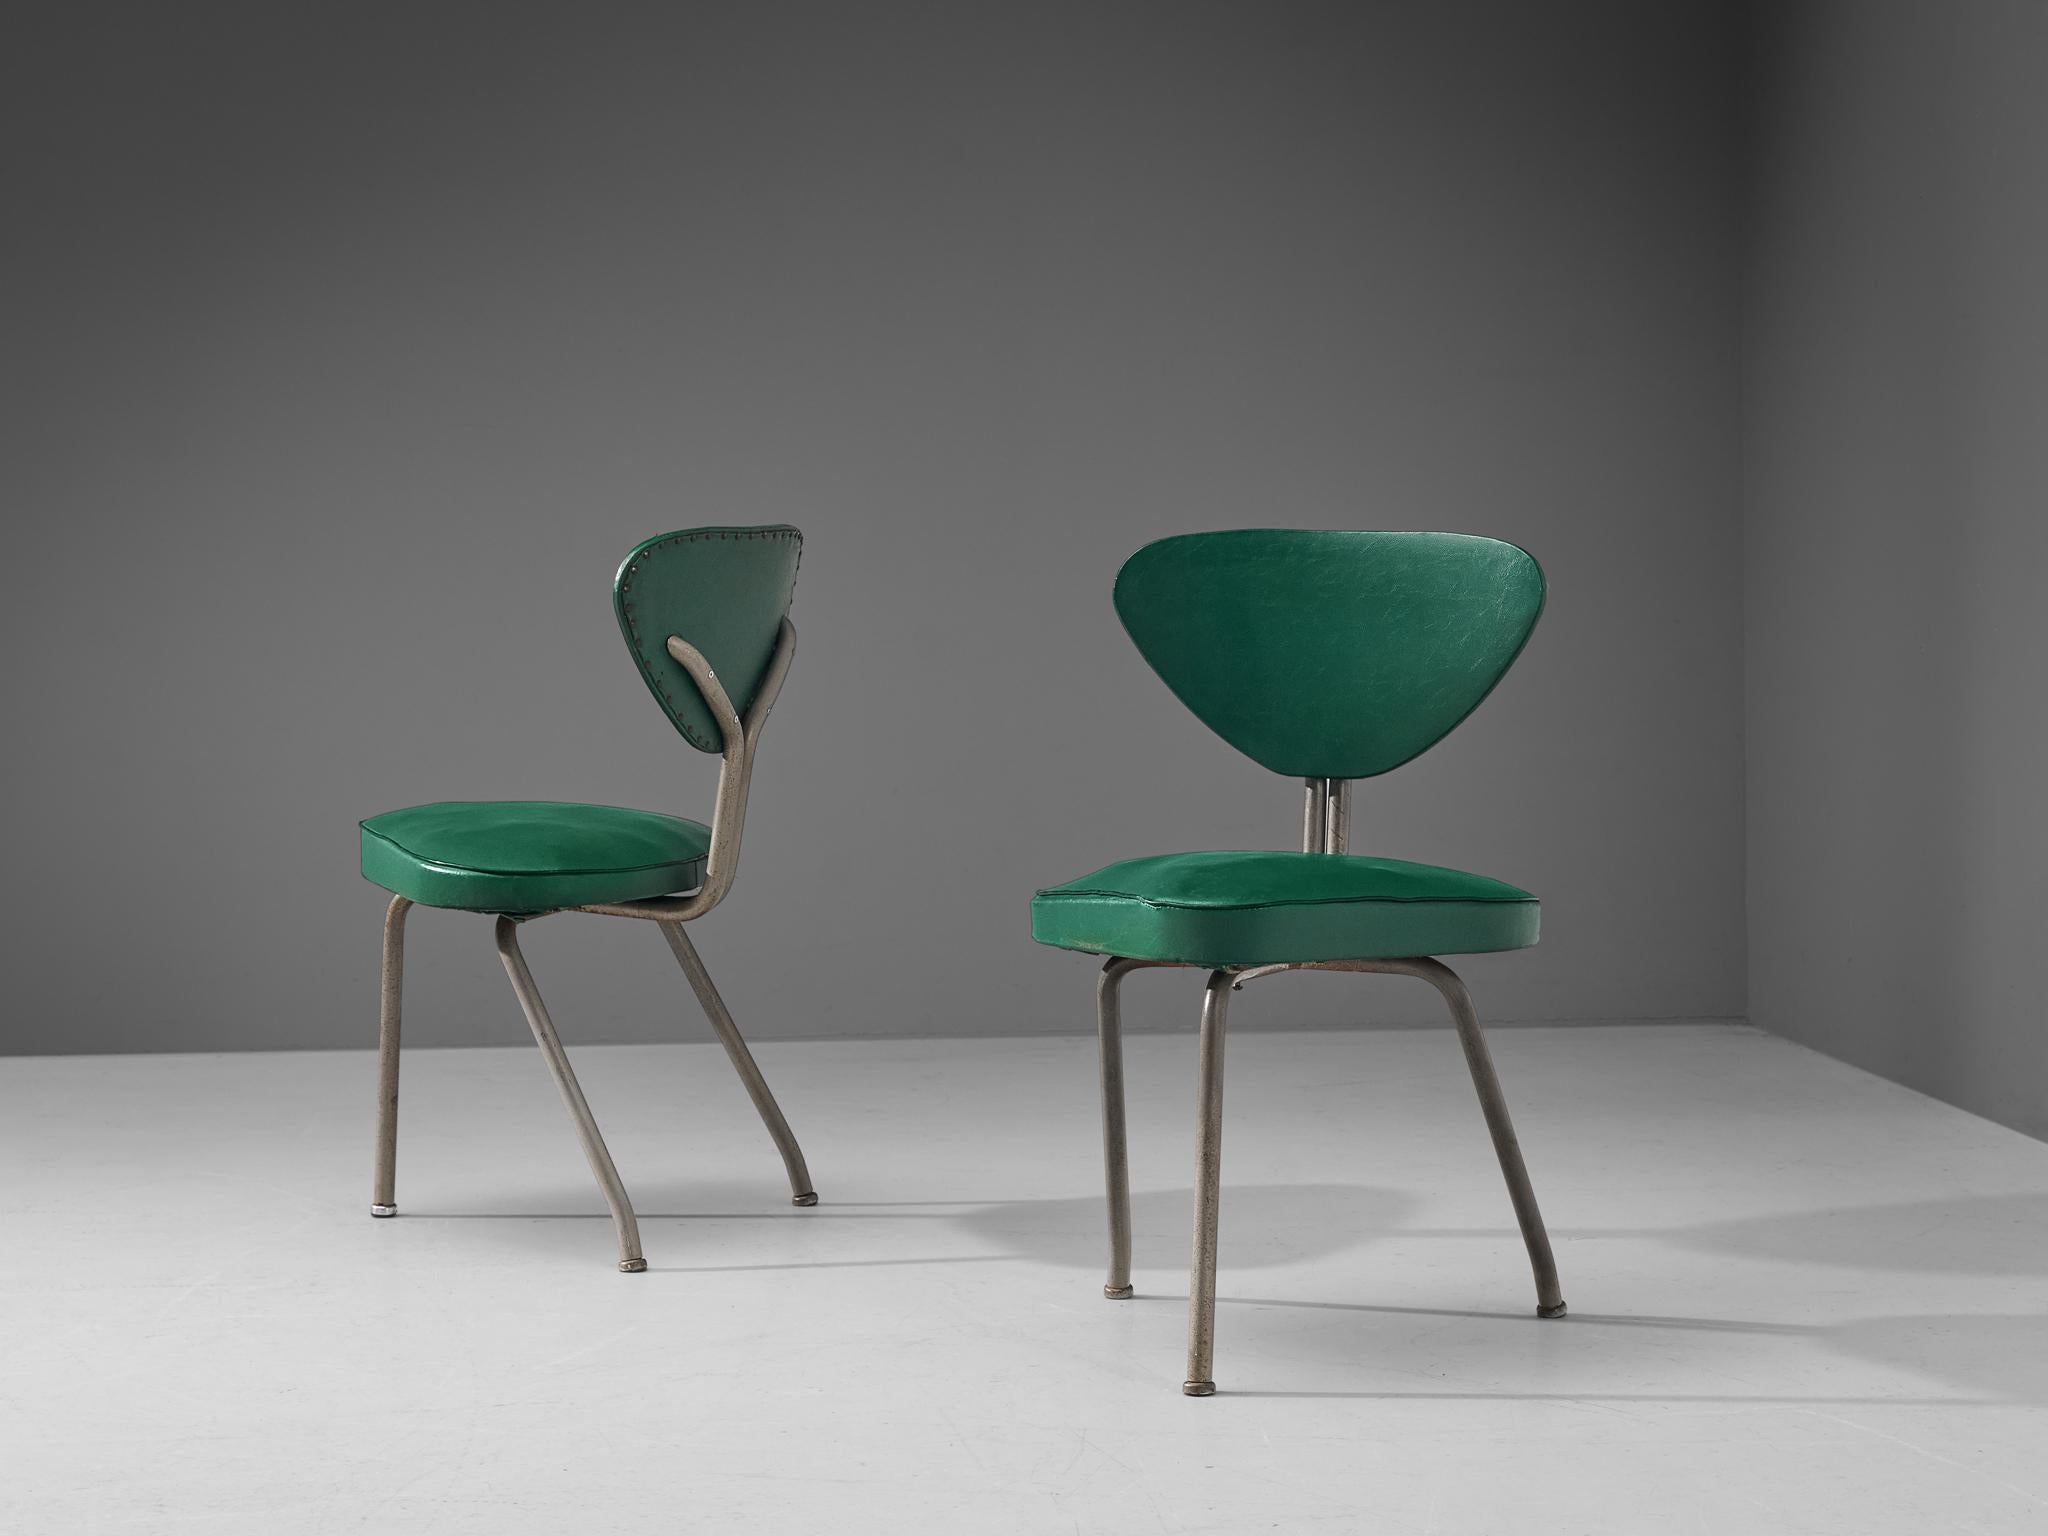 Pair of tripod chairs, steel, green leatherette, iron, Europe, 1960s. 

Pair of modest tripod chairs in green leatherette. These chairs feature a clear geometrical shape. Note for example the triangular shaped seating and backrest. The three steel